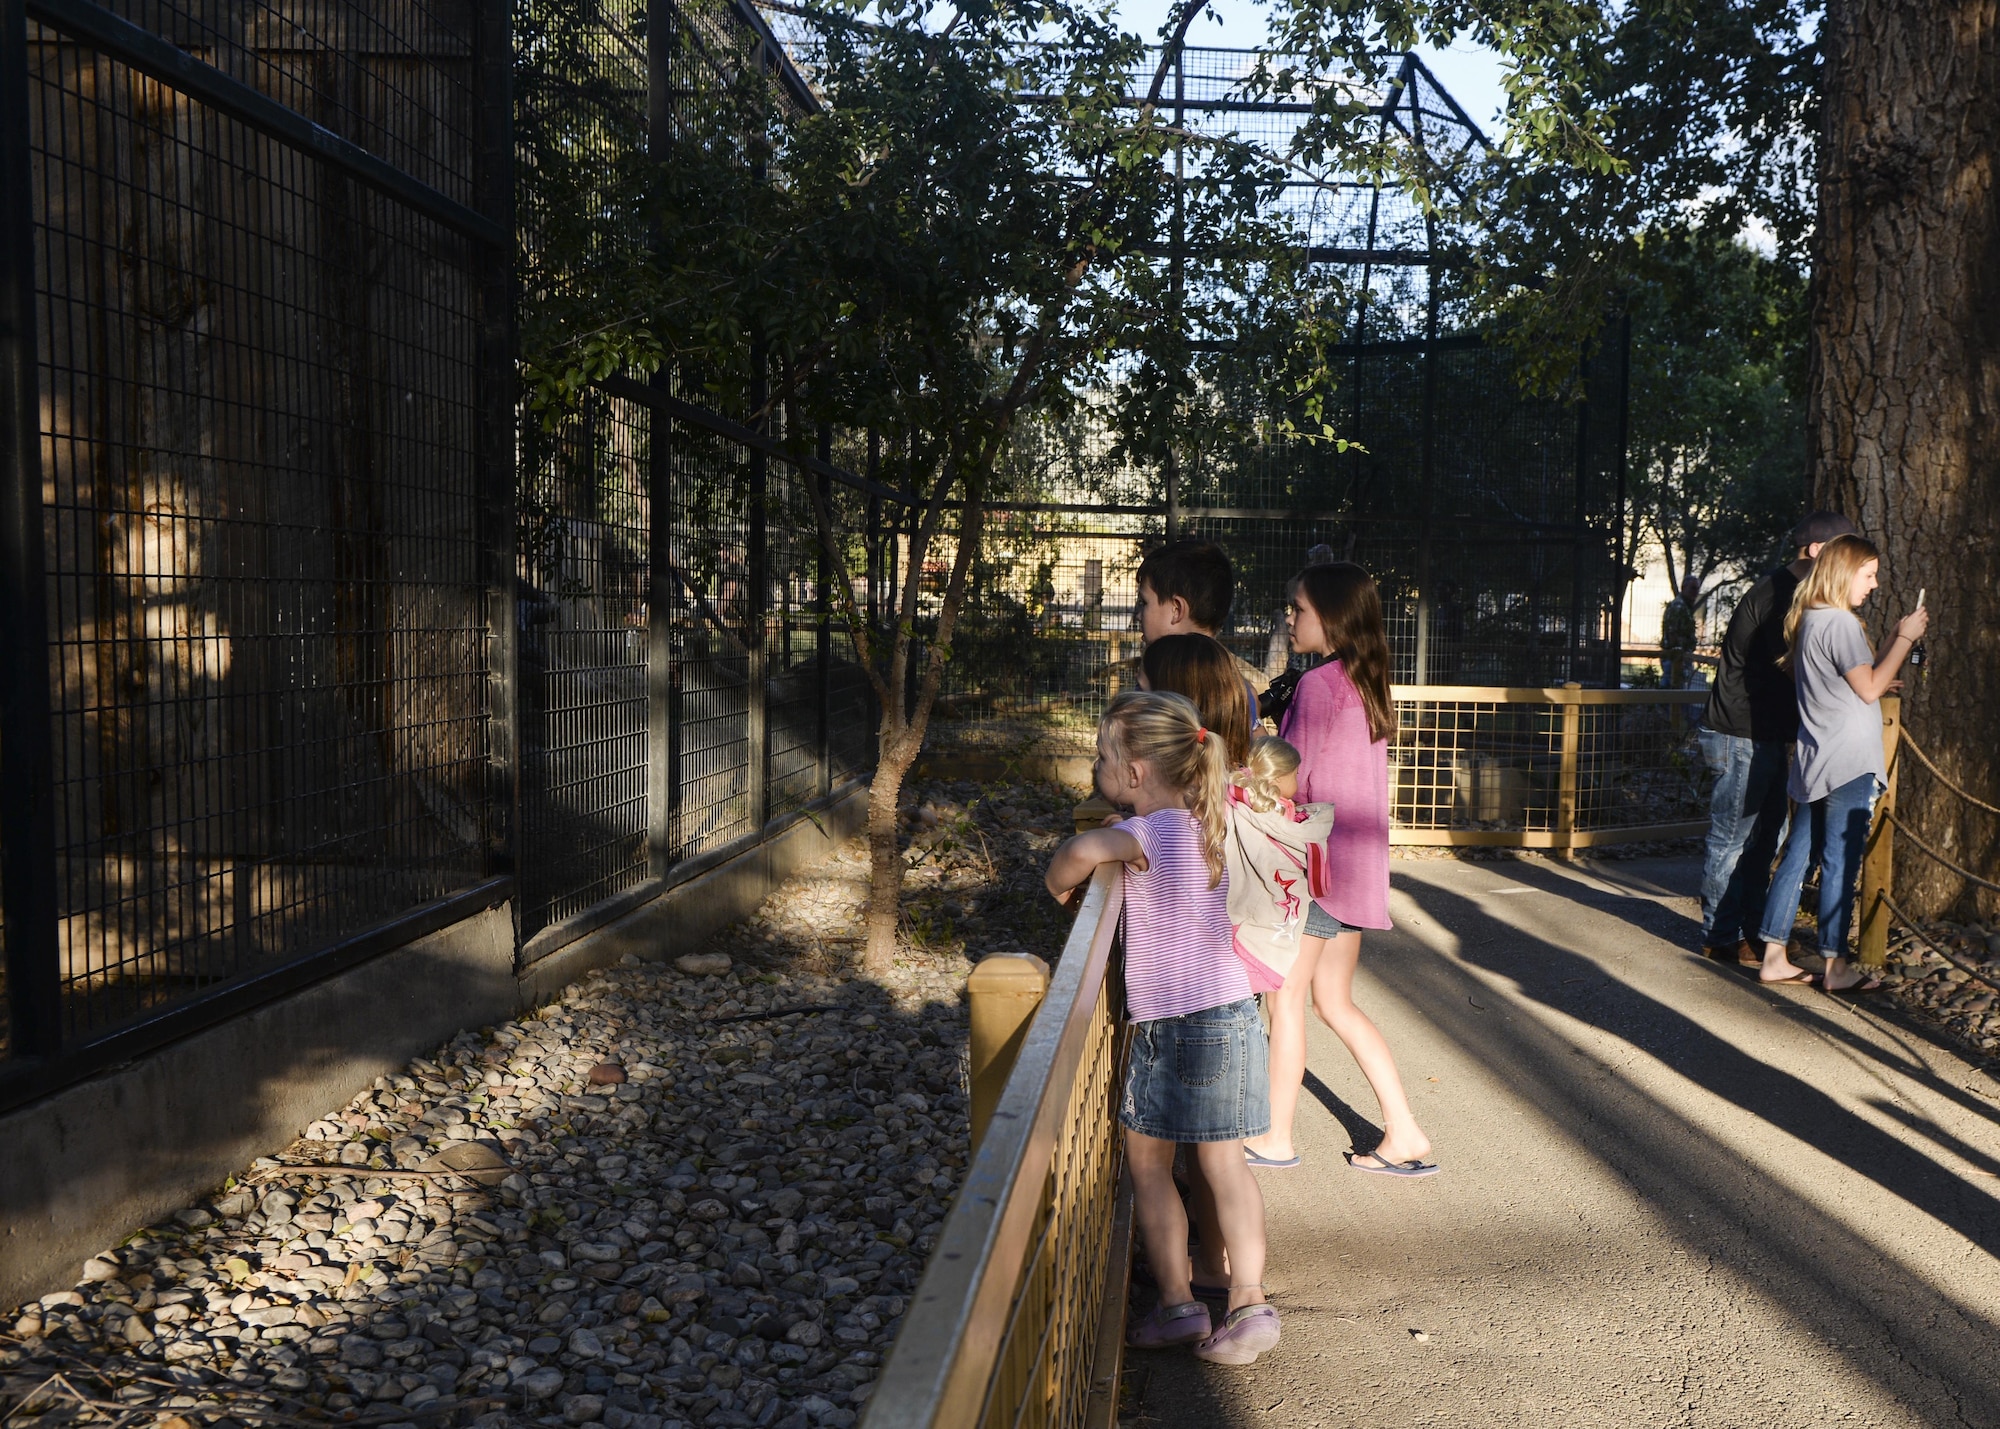 Children watch animals in an enclosure at the annual Zoo After Hours event at Alameda Park Zoo in Alamogordo, N.M. on Sept. 24, 2016. Military families were permitted to explore the zoo grounds after hours. (U.S. Air Force photo by Airman 1st Class Alexis P. Docherty)